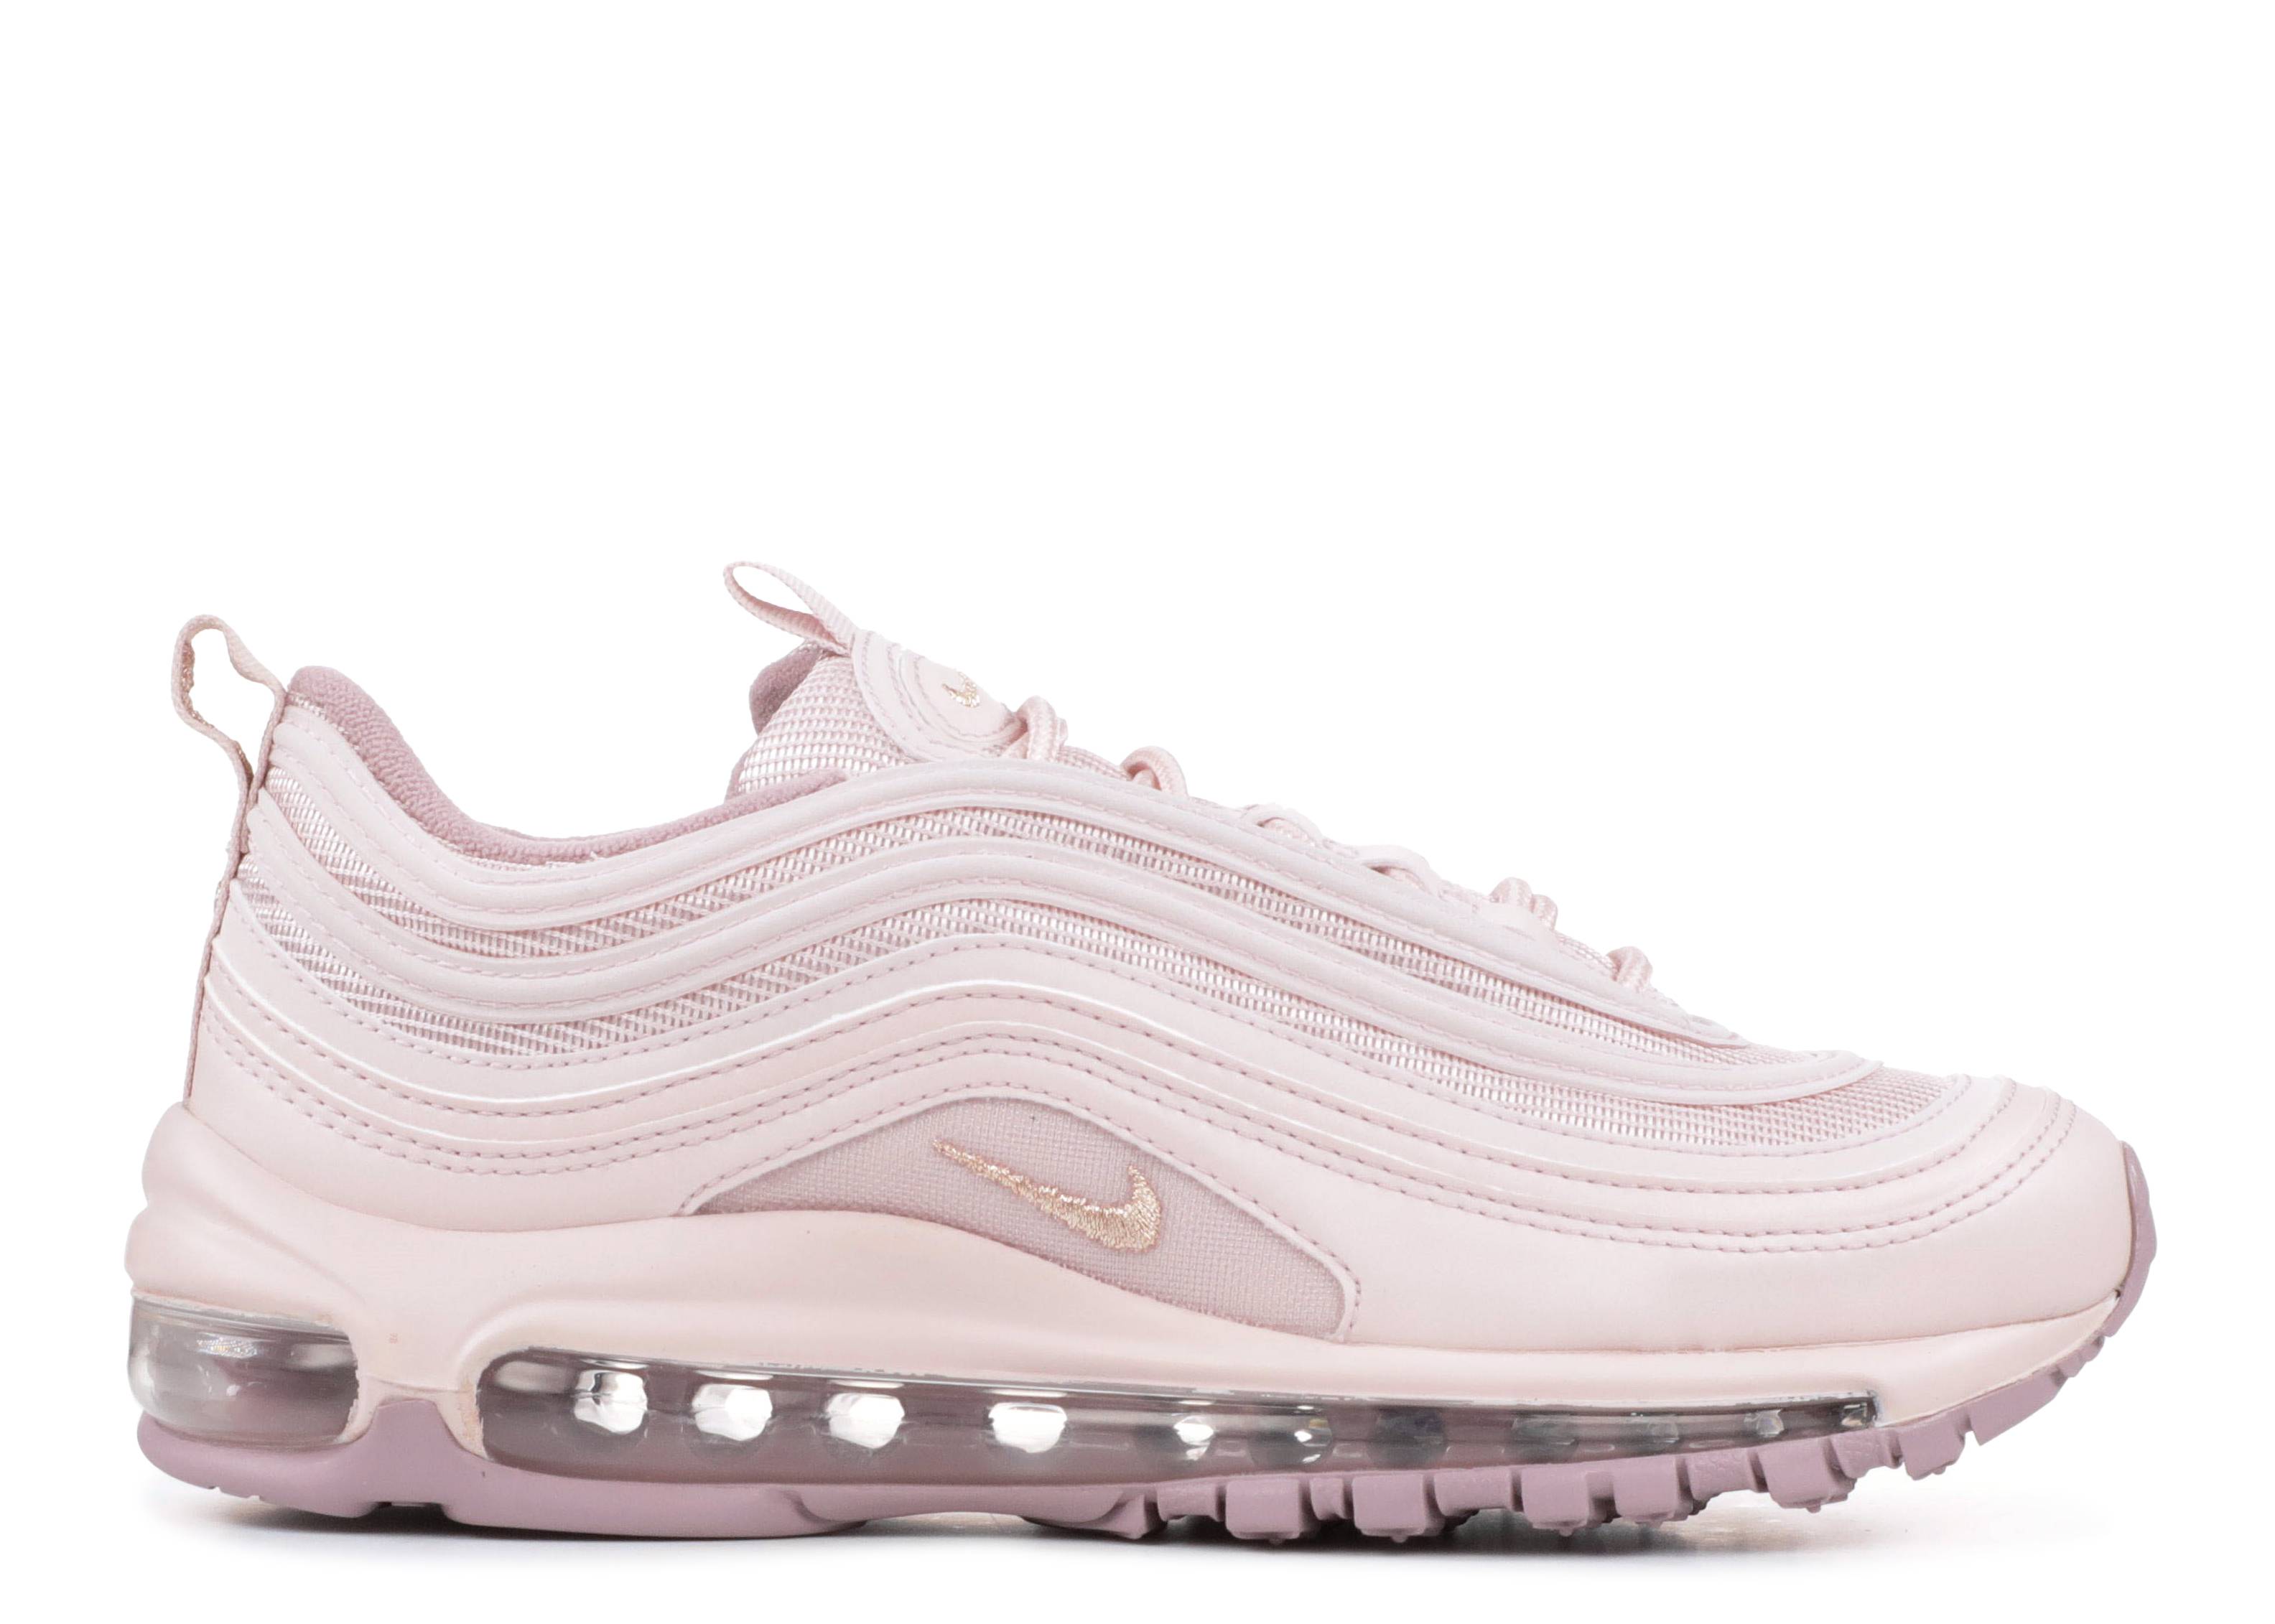 Wmns Air Max 97 'Barely Rose'